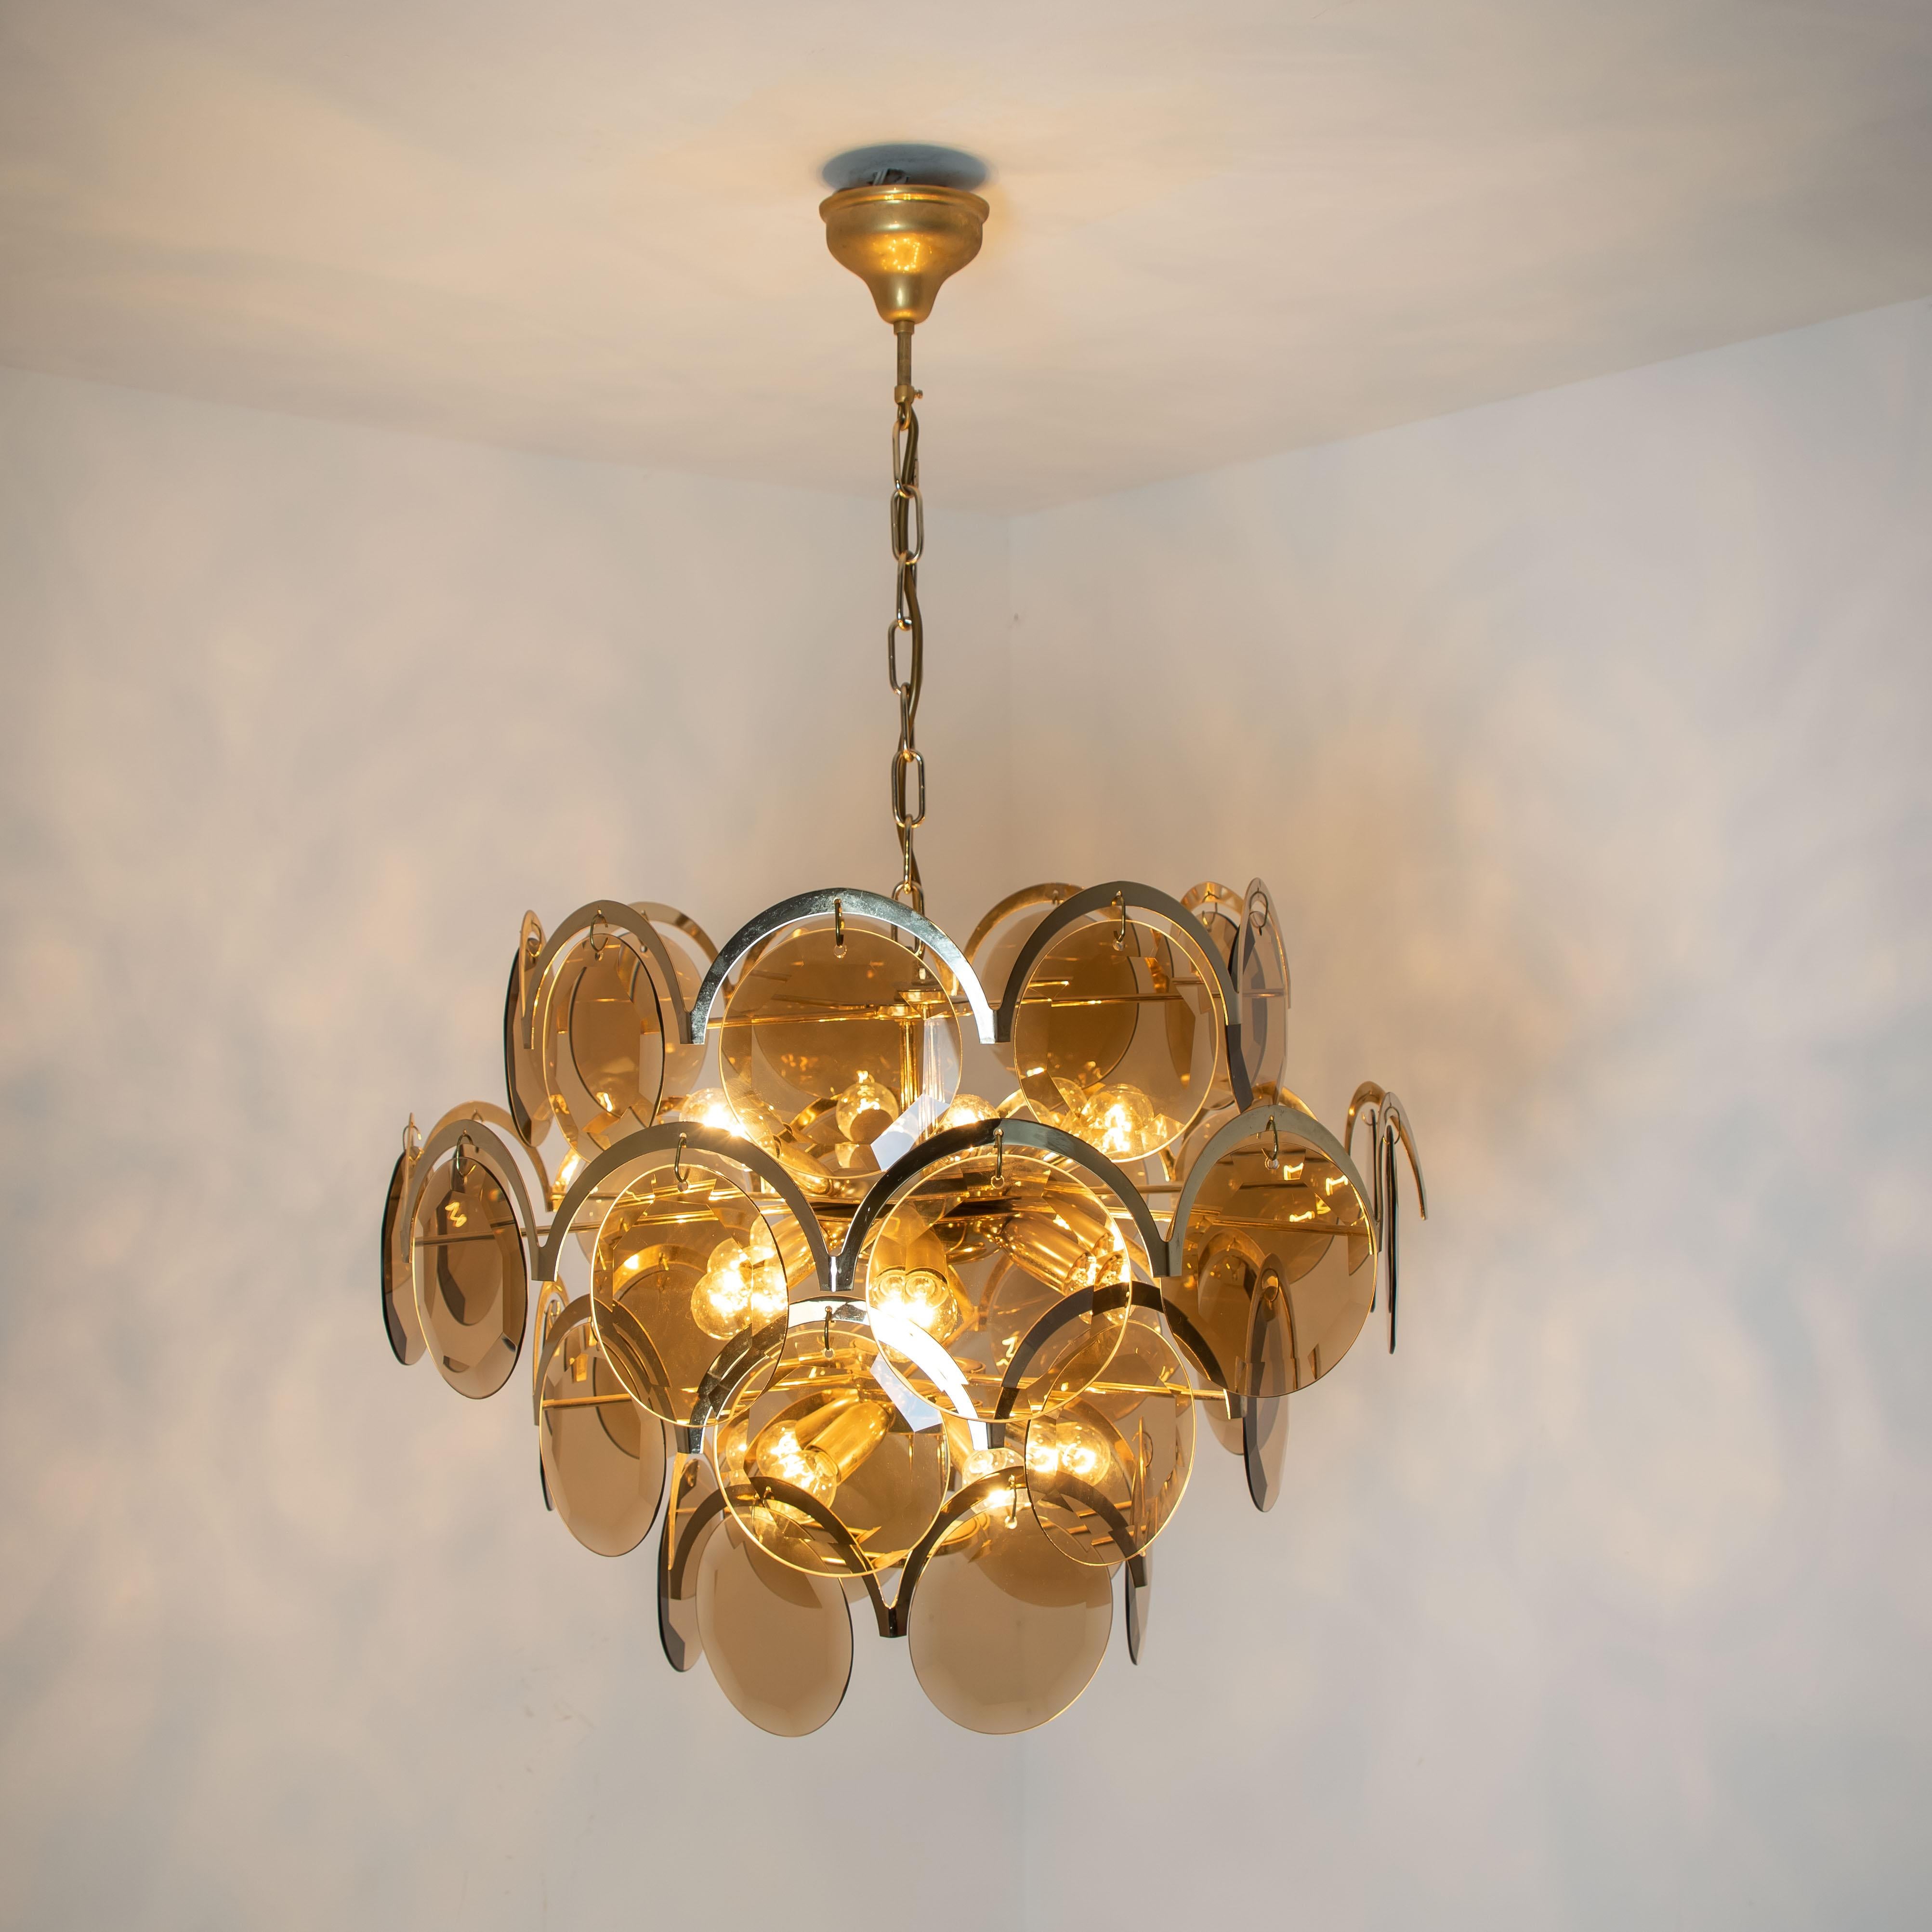 Large Smoked Glass and Brass Chandelier in the Style of Vistosi, Italy For Sale 1